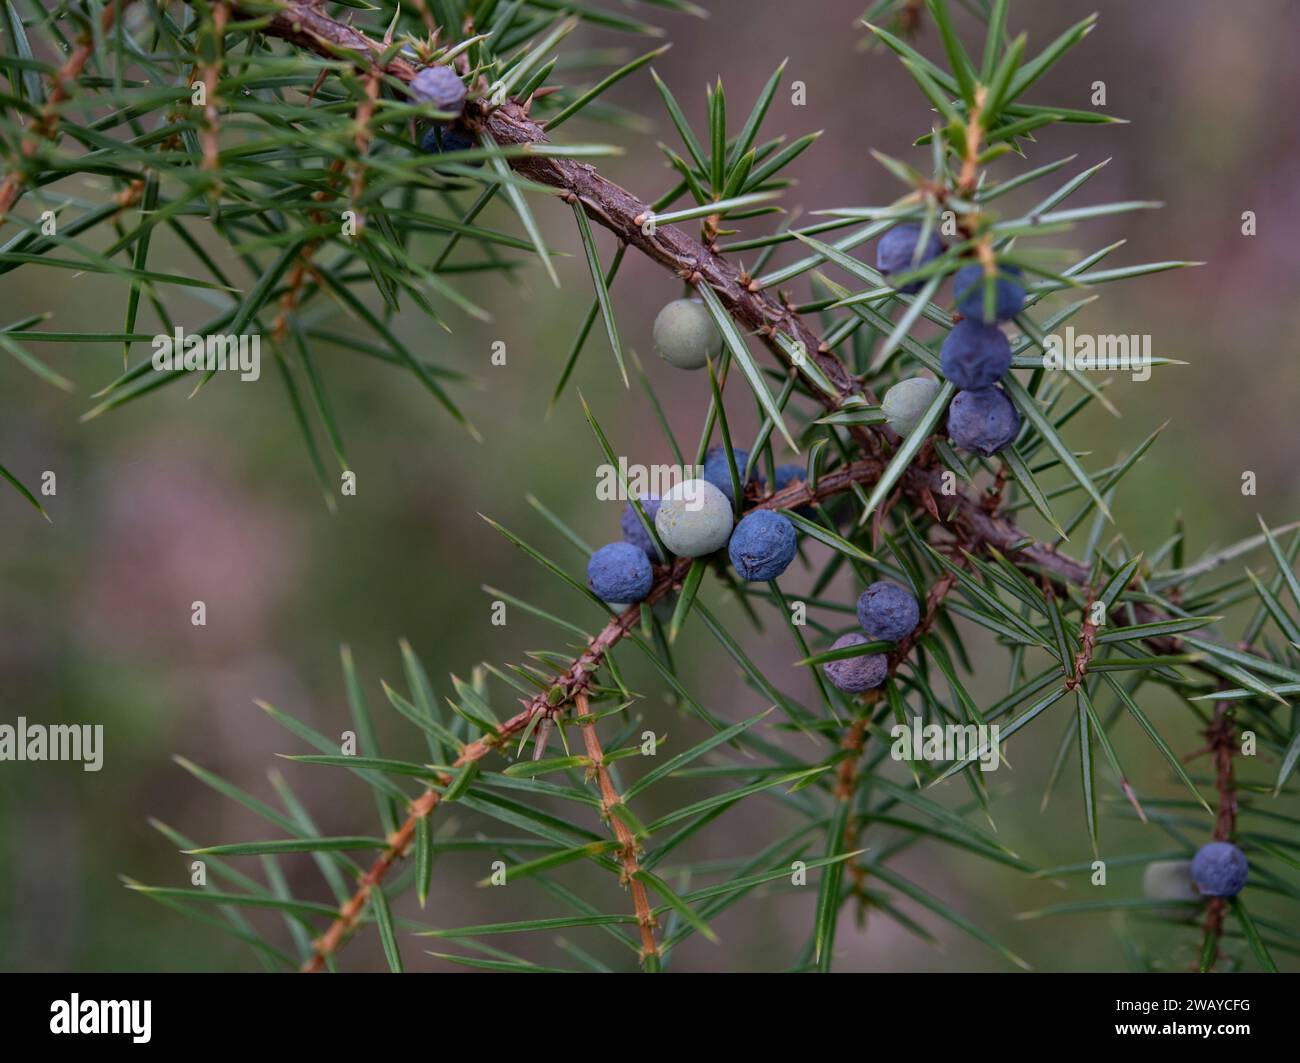 Juniperus communis is a species of small tree or shrub in the cypress family Cupressaceae. Stock Photo